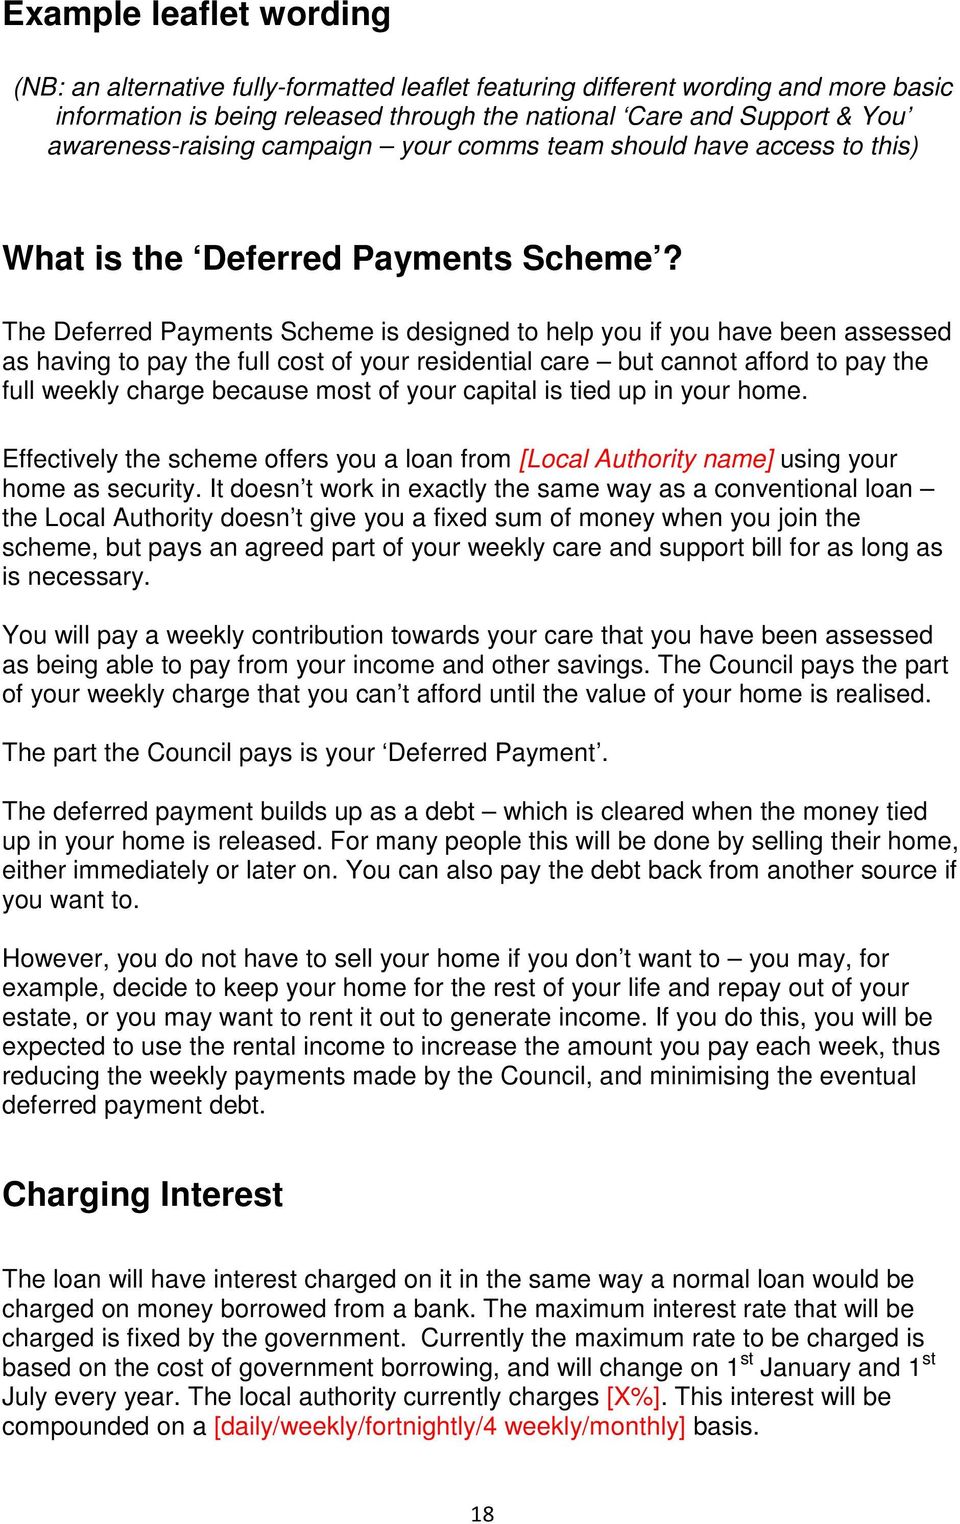 The Deferred Payments Scheme is designed to help you if you have been assessed as having to pay the full cost of your residential care but cannot afford to pay the full weekly charge because most of